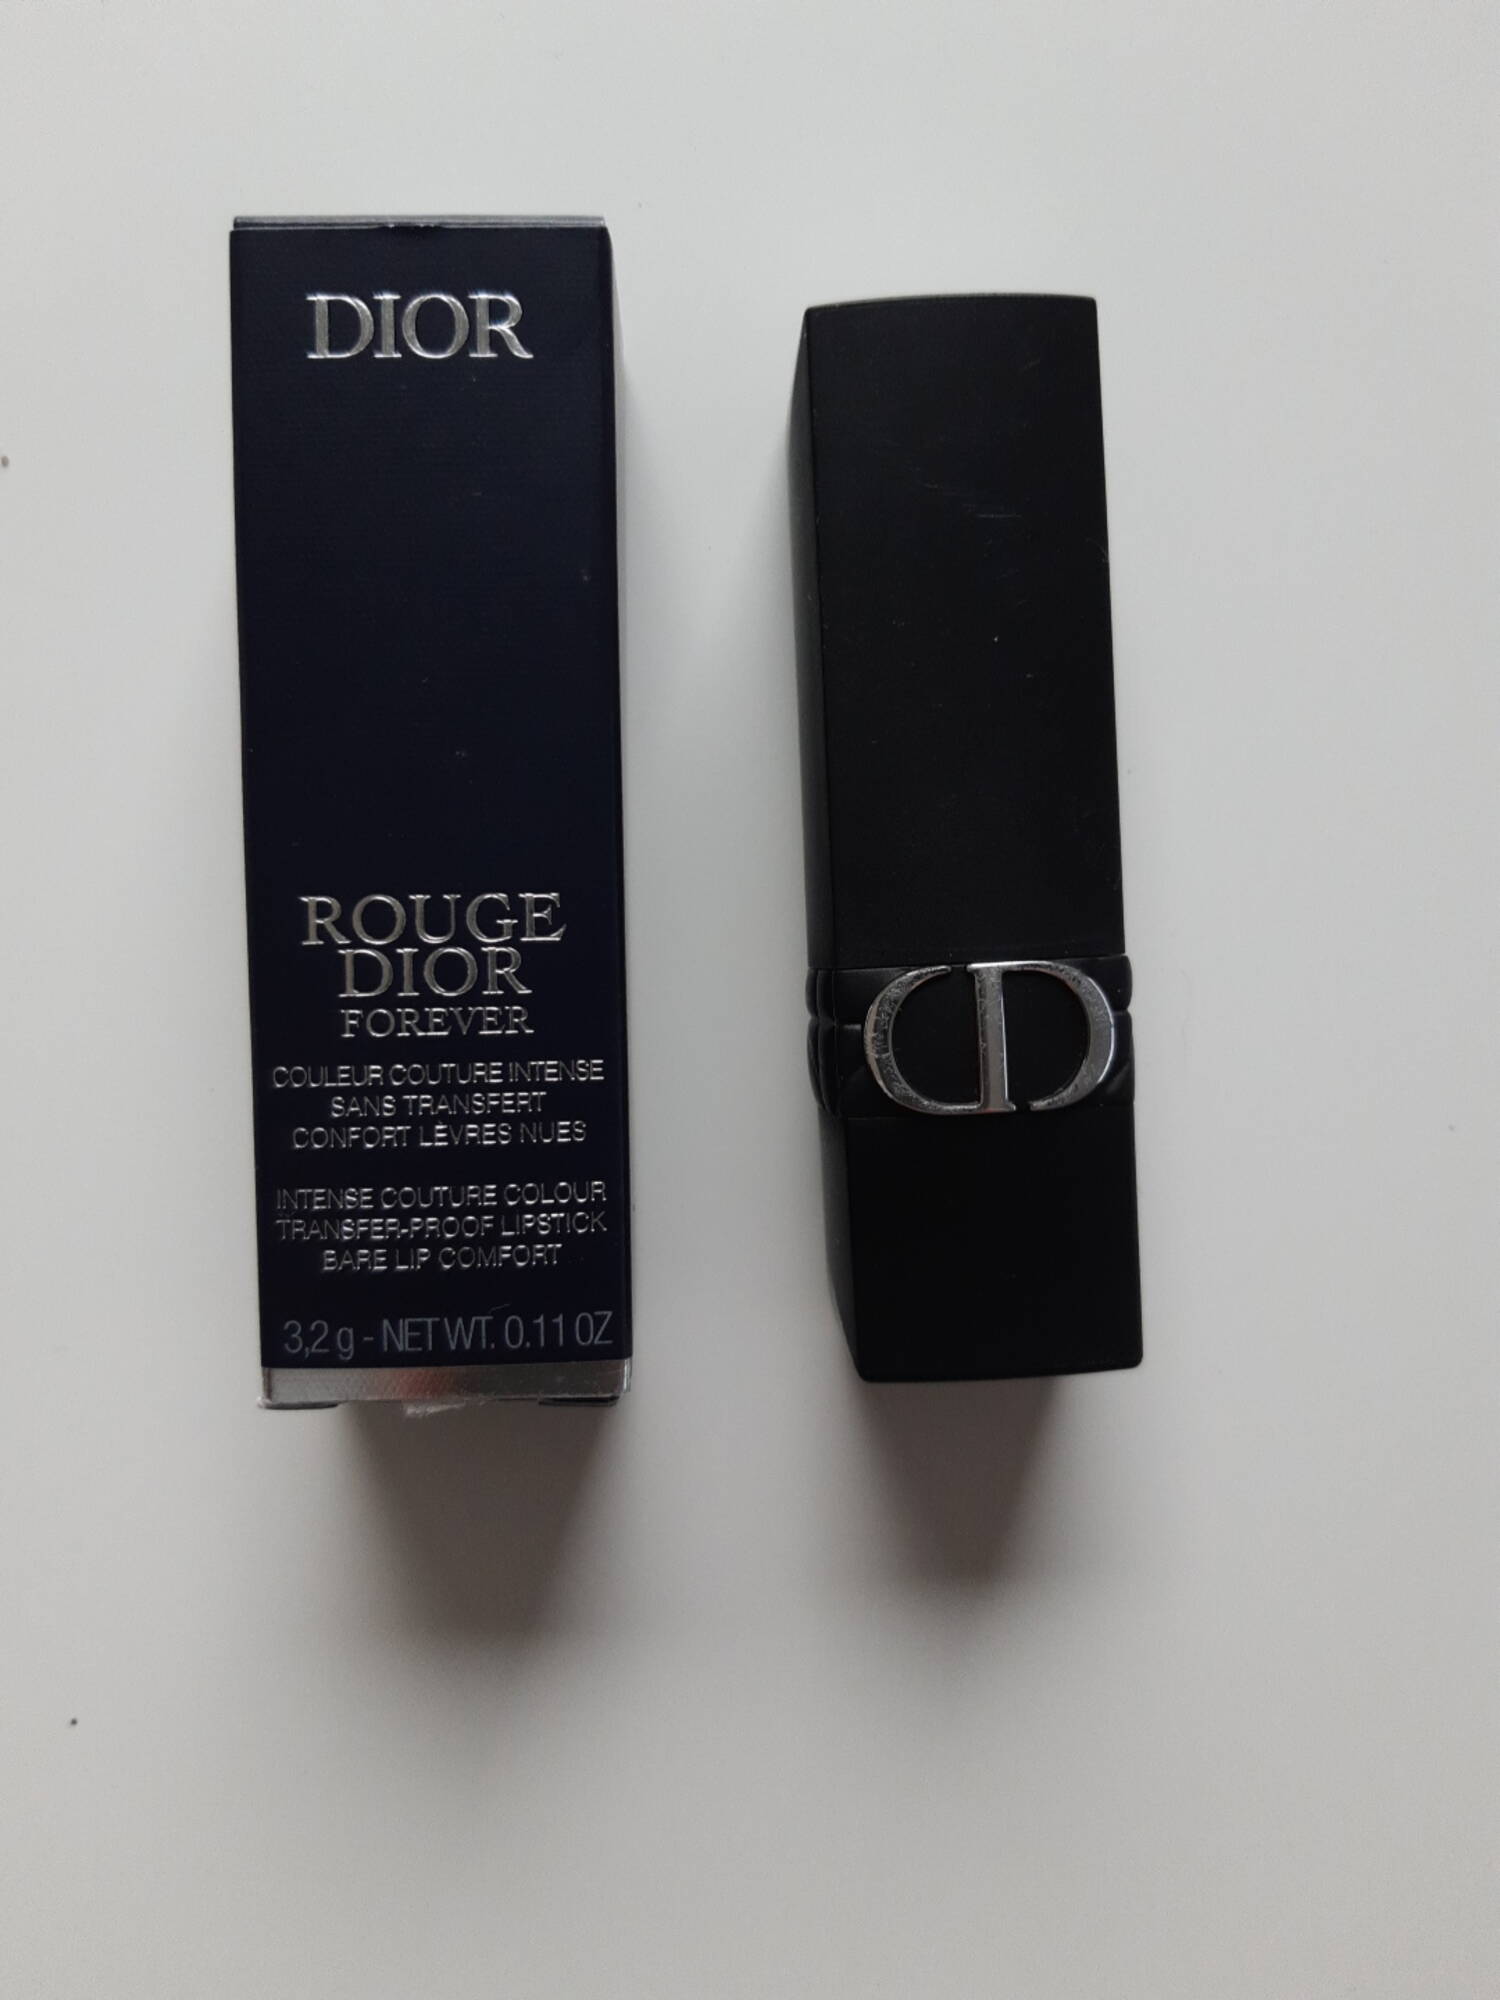 DIOR - Rouge dior forever